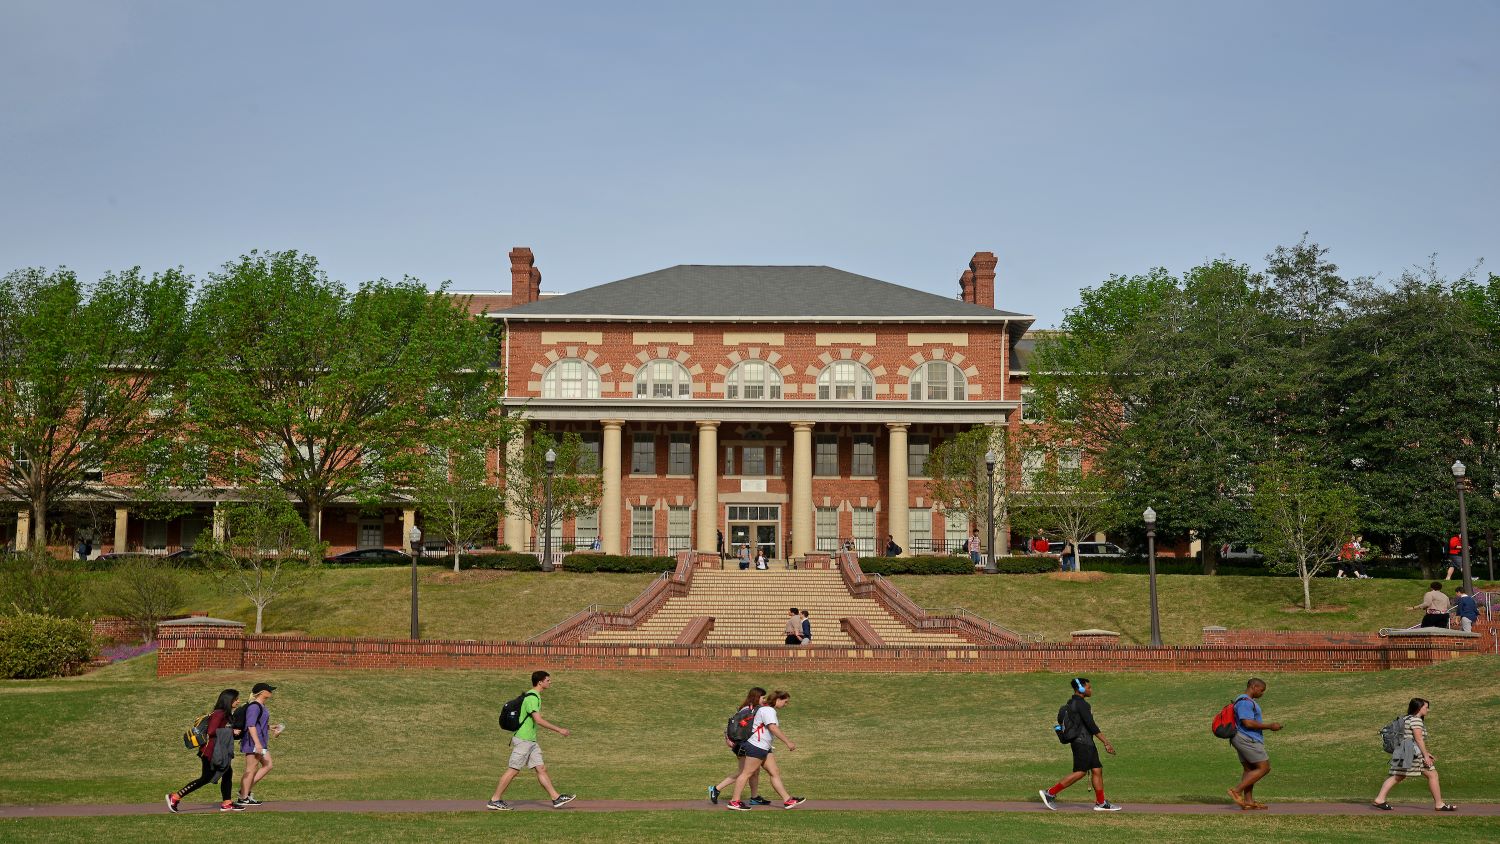 The Onboarding Center will host walking tours of NC State’s North Campus on May 27 and June 8.